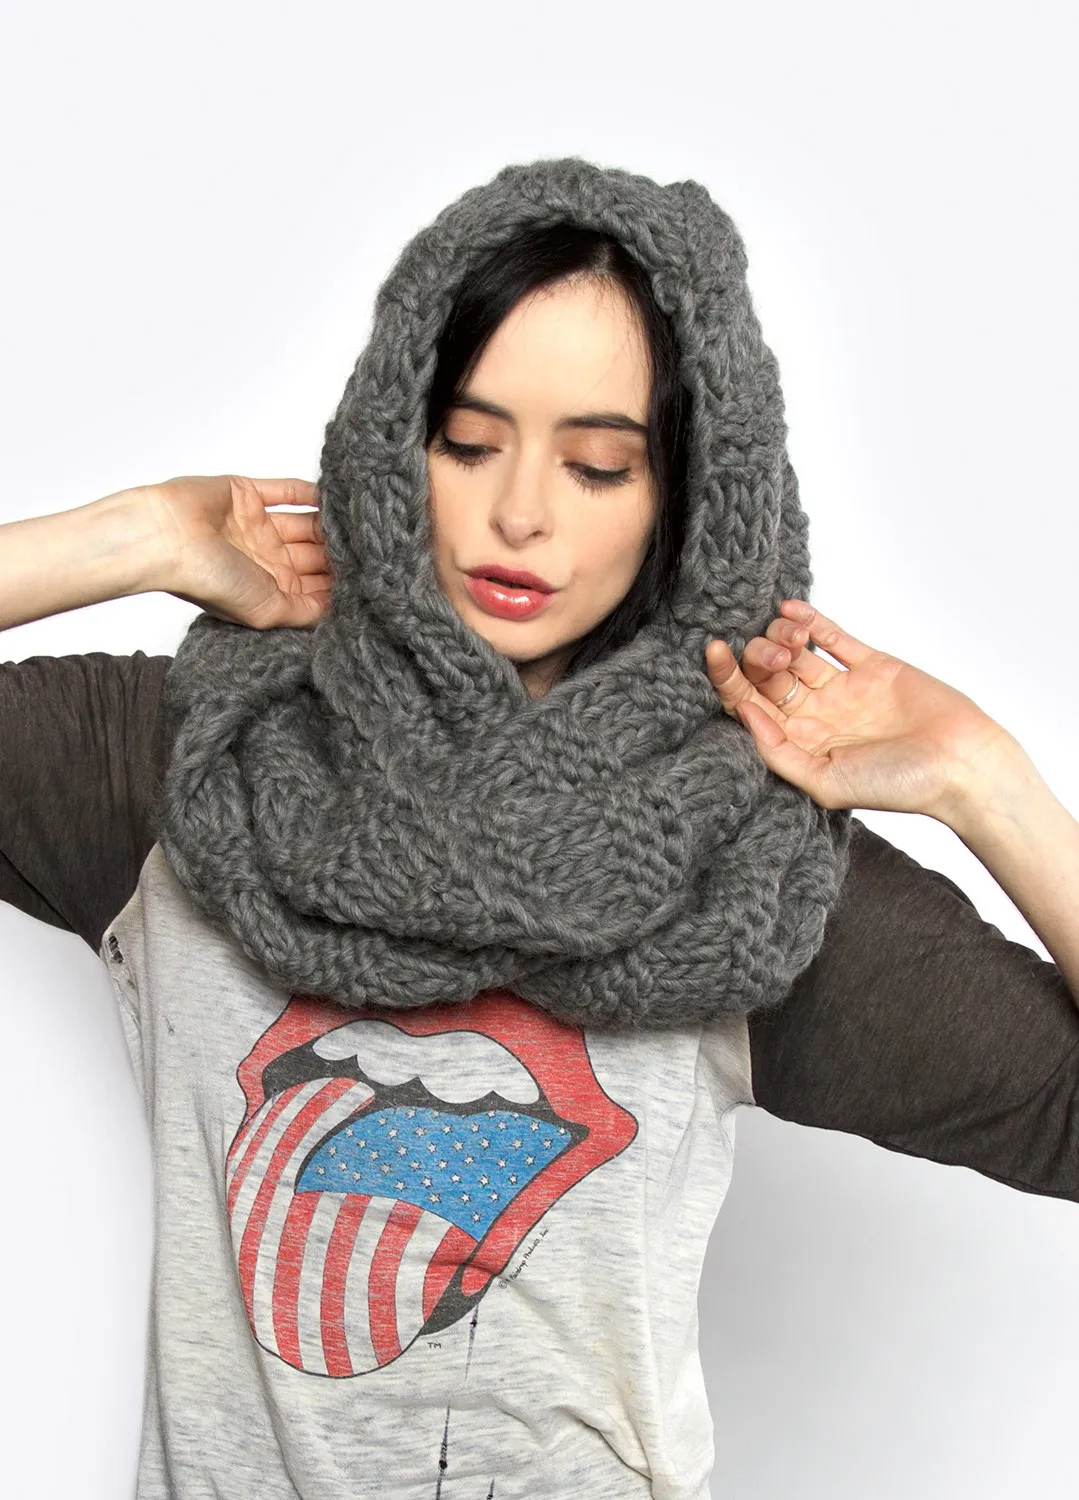 krysten ritter interview with we are knitters 6